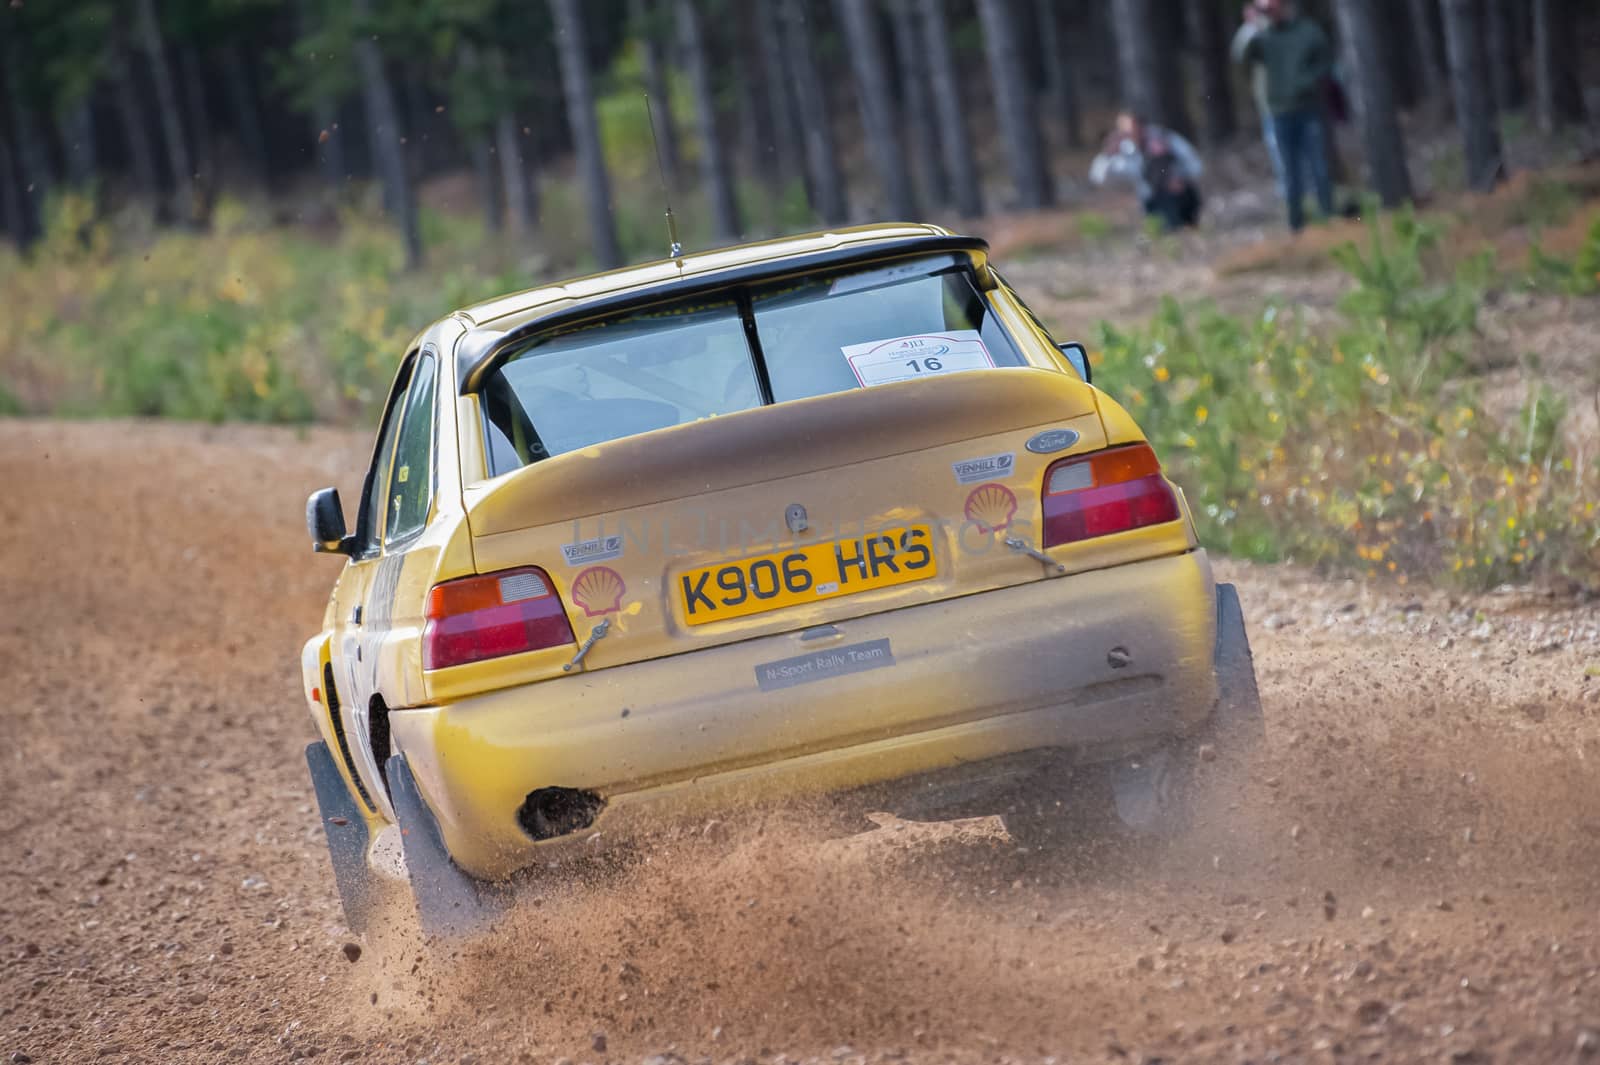 Bramshill Forest, UK - November 3, 2012: Tony Bird driving a Ford Escort Cosworth on the Warren stage of the MSA Tempest Rally in Bramshill Forest, UK